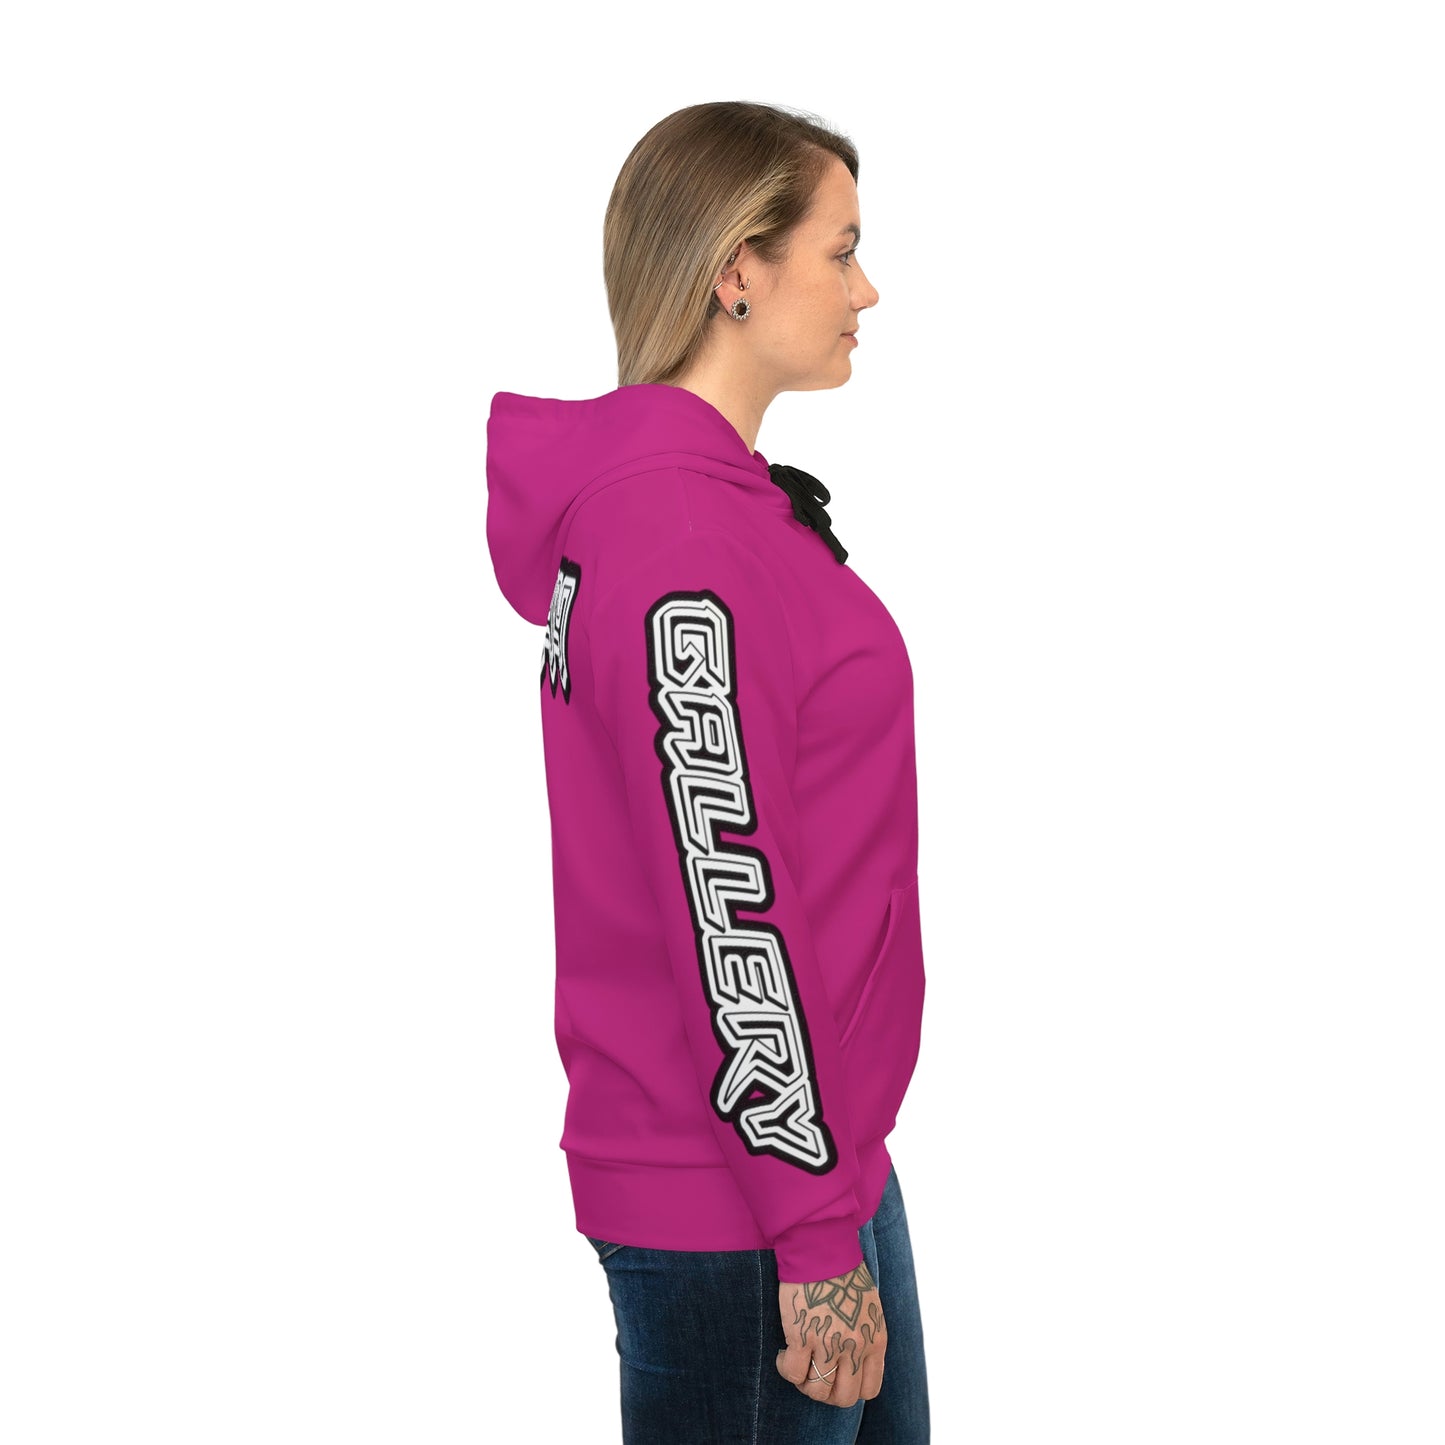 Atziluth Gallery " Moto-X" Hoodie (Pink)